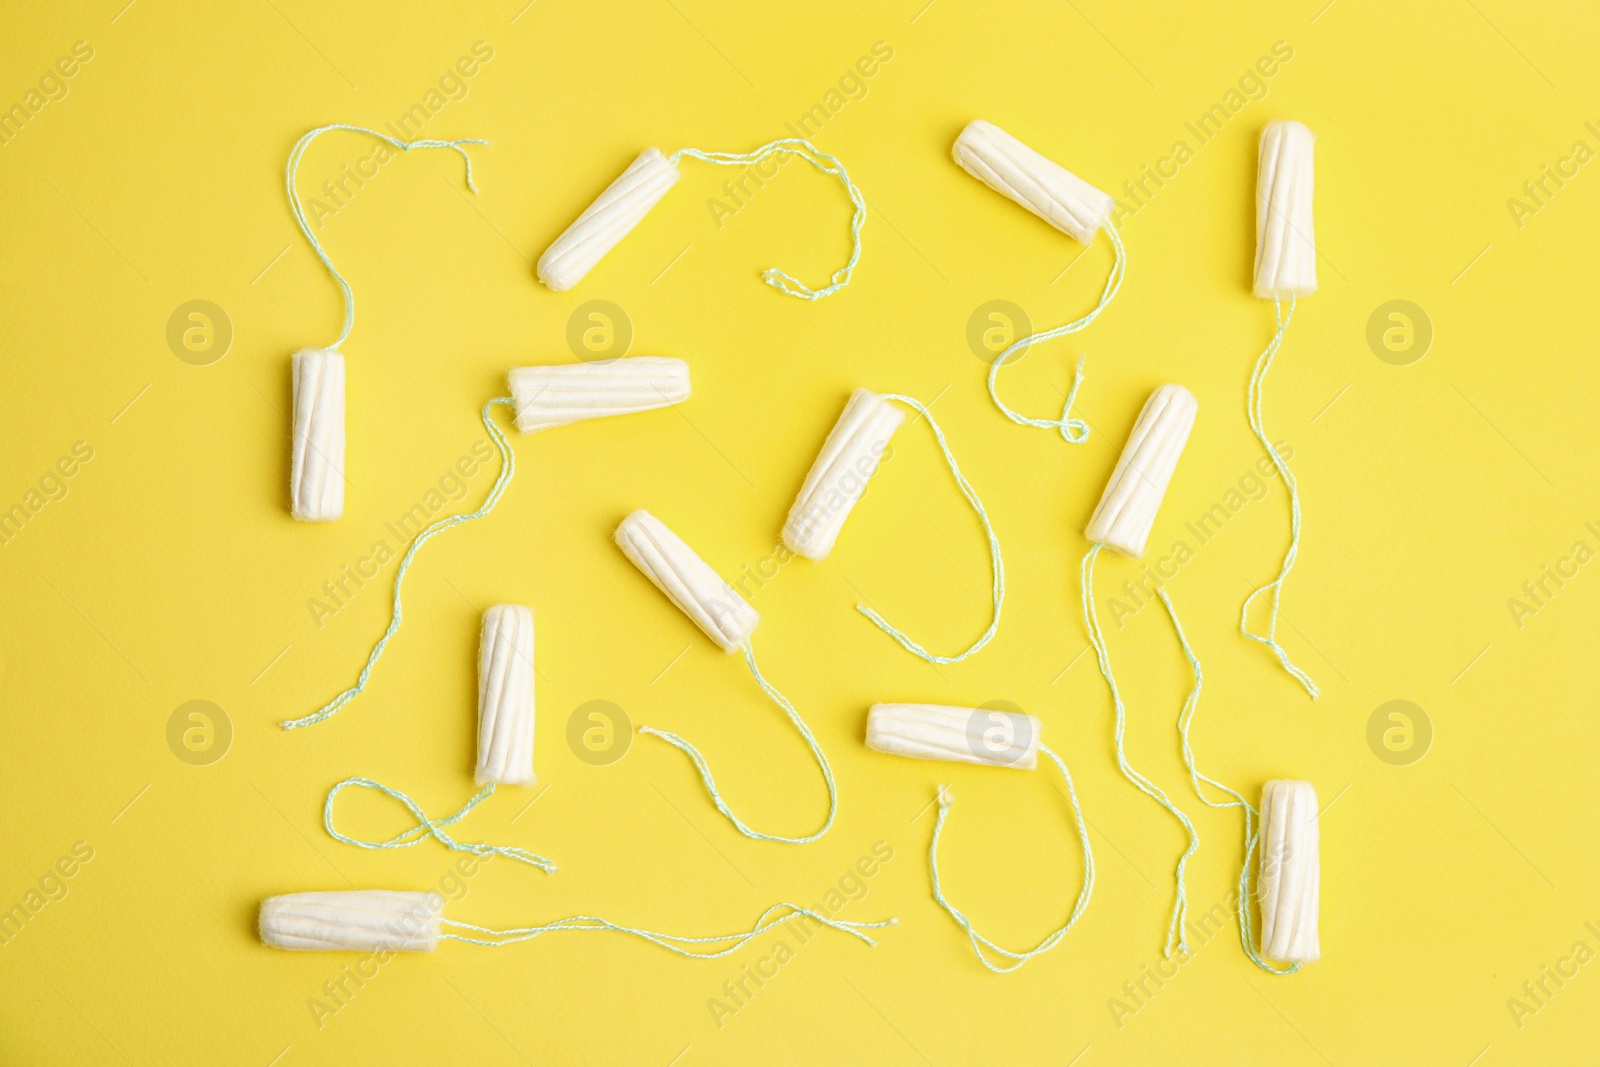 Photo of Tampons on yellow background, flat lay. Menstrual hygiene product